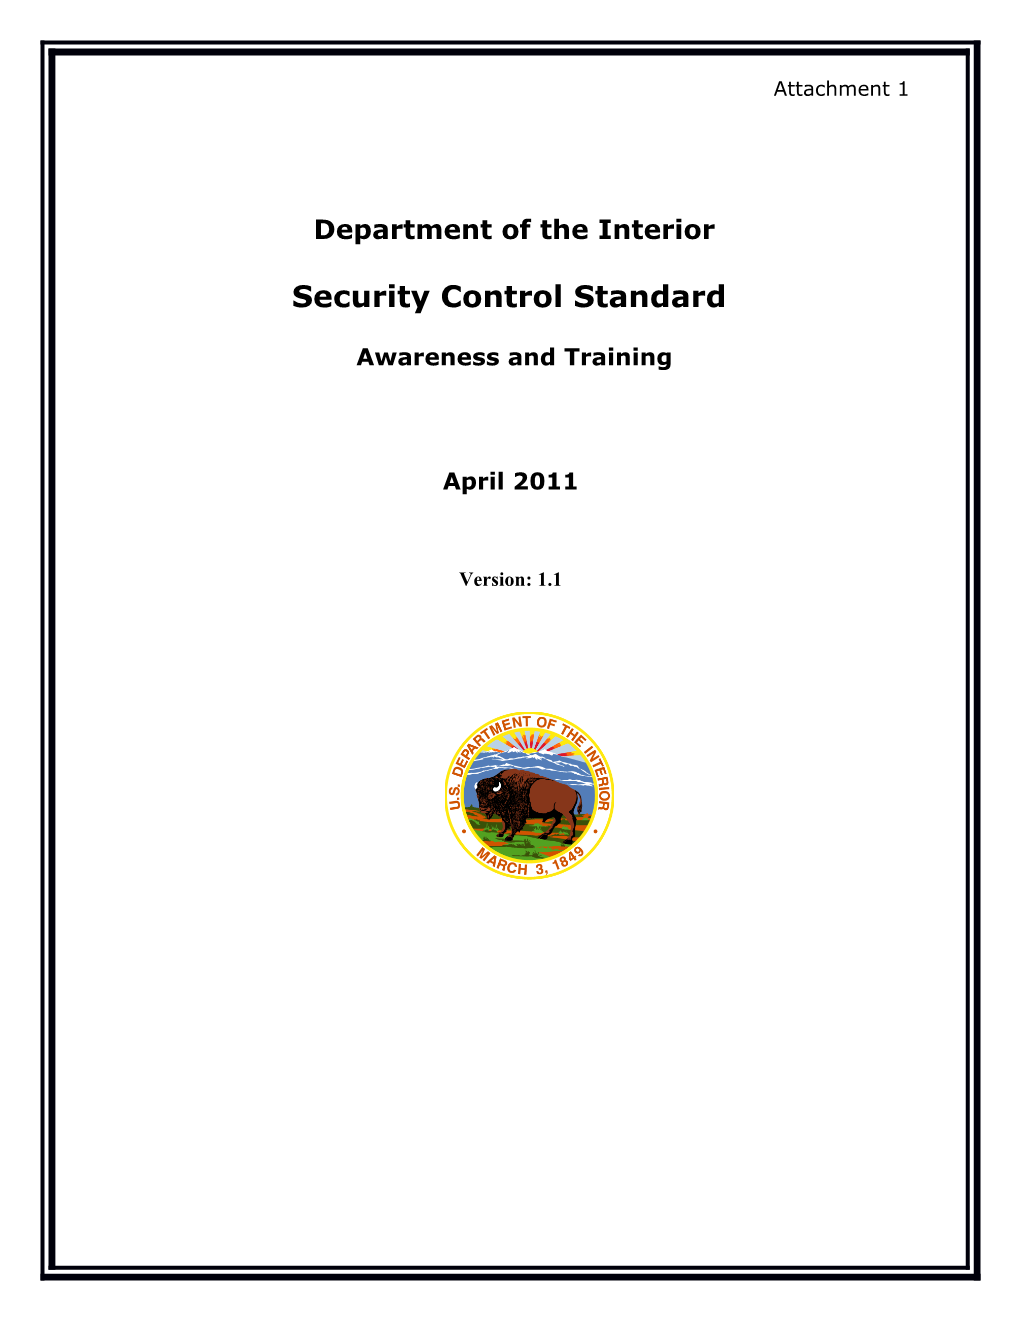 Department of the Interior Security Control Standard Awareness and Training